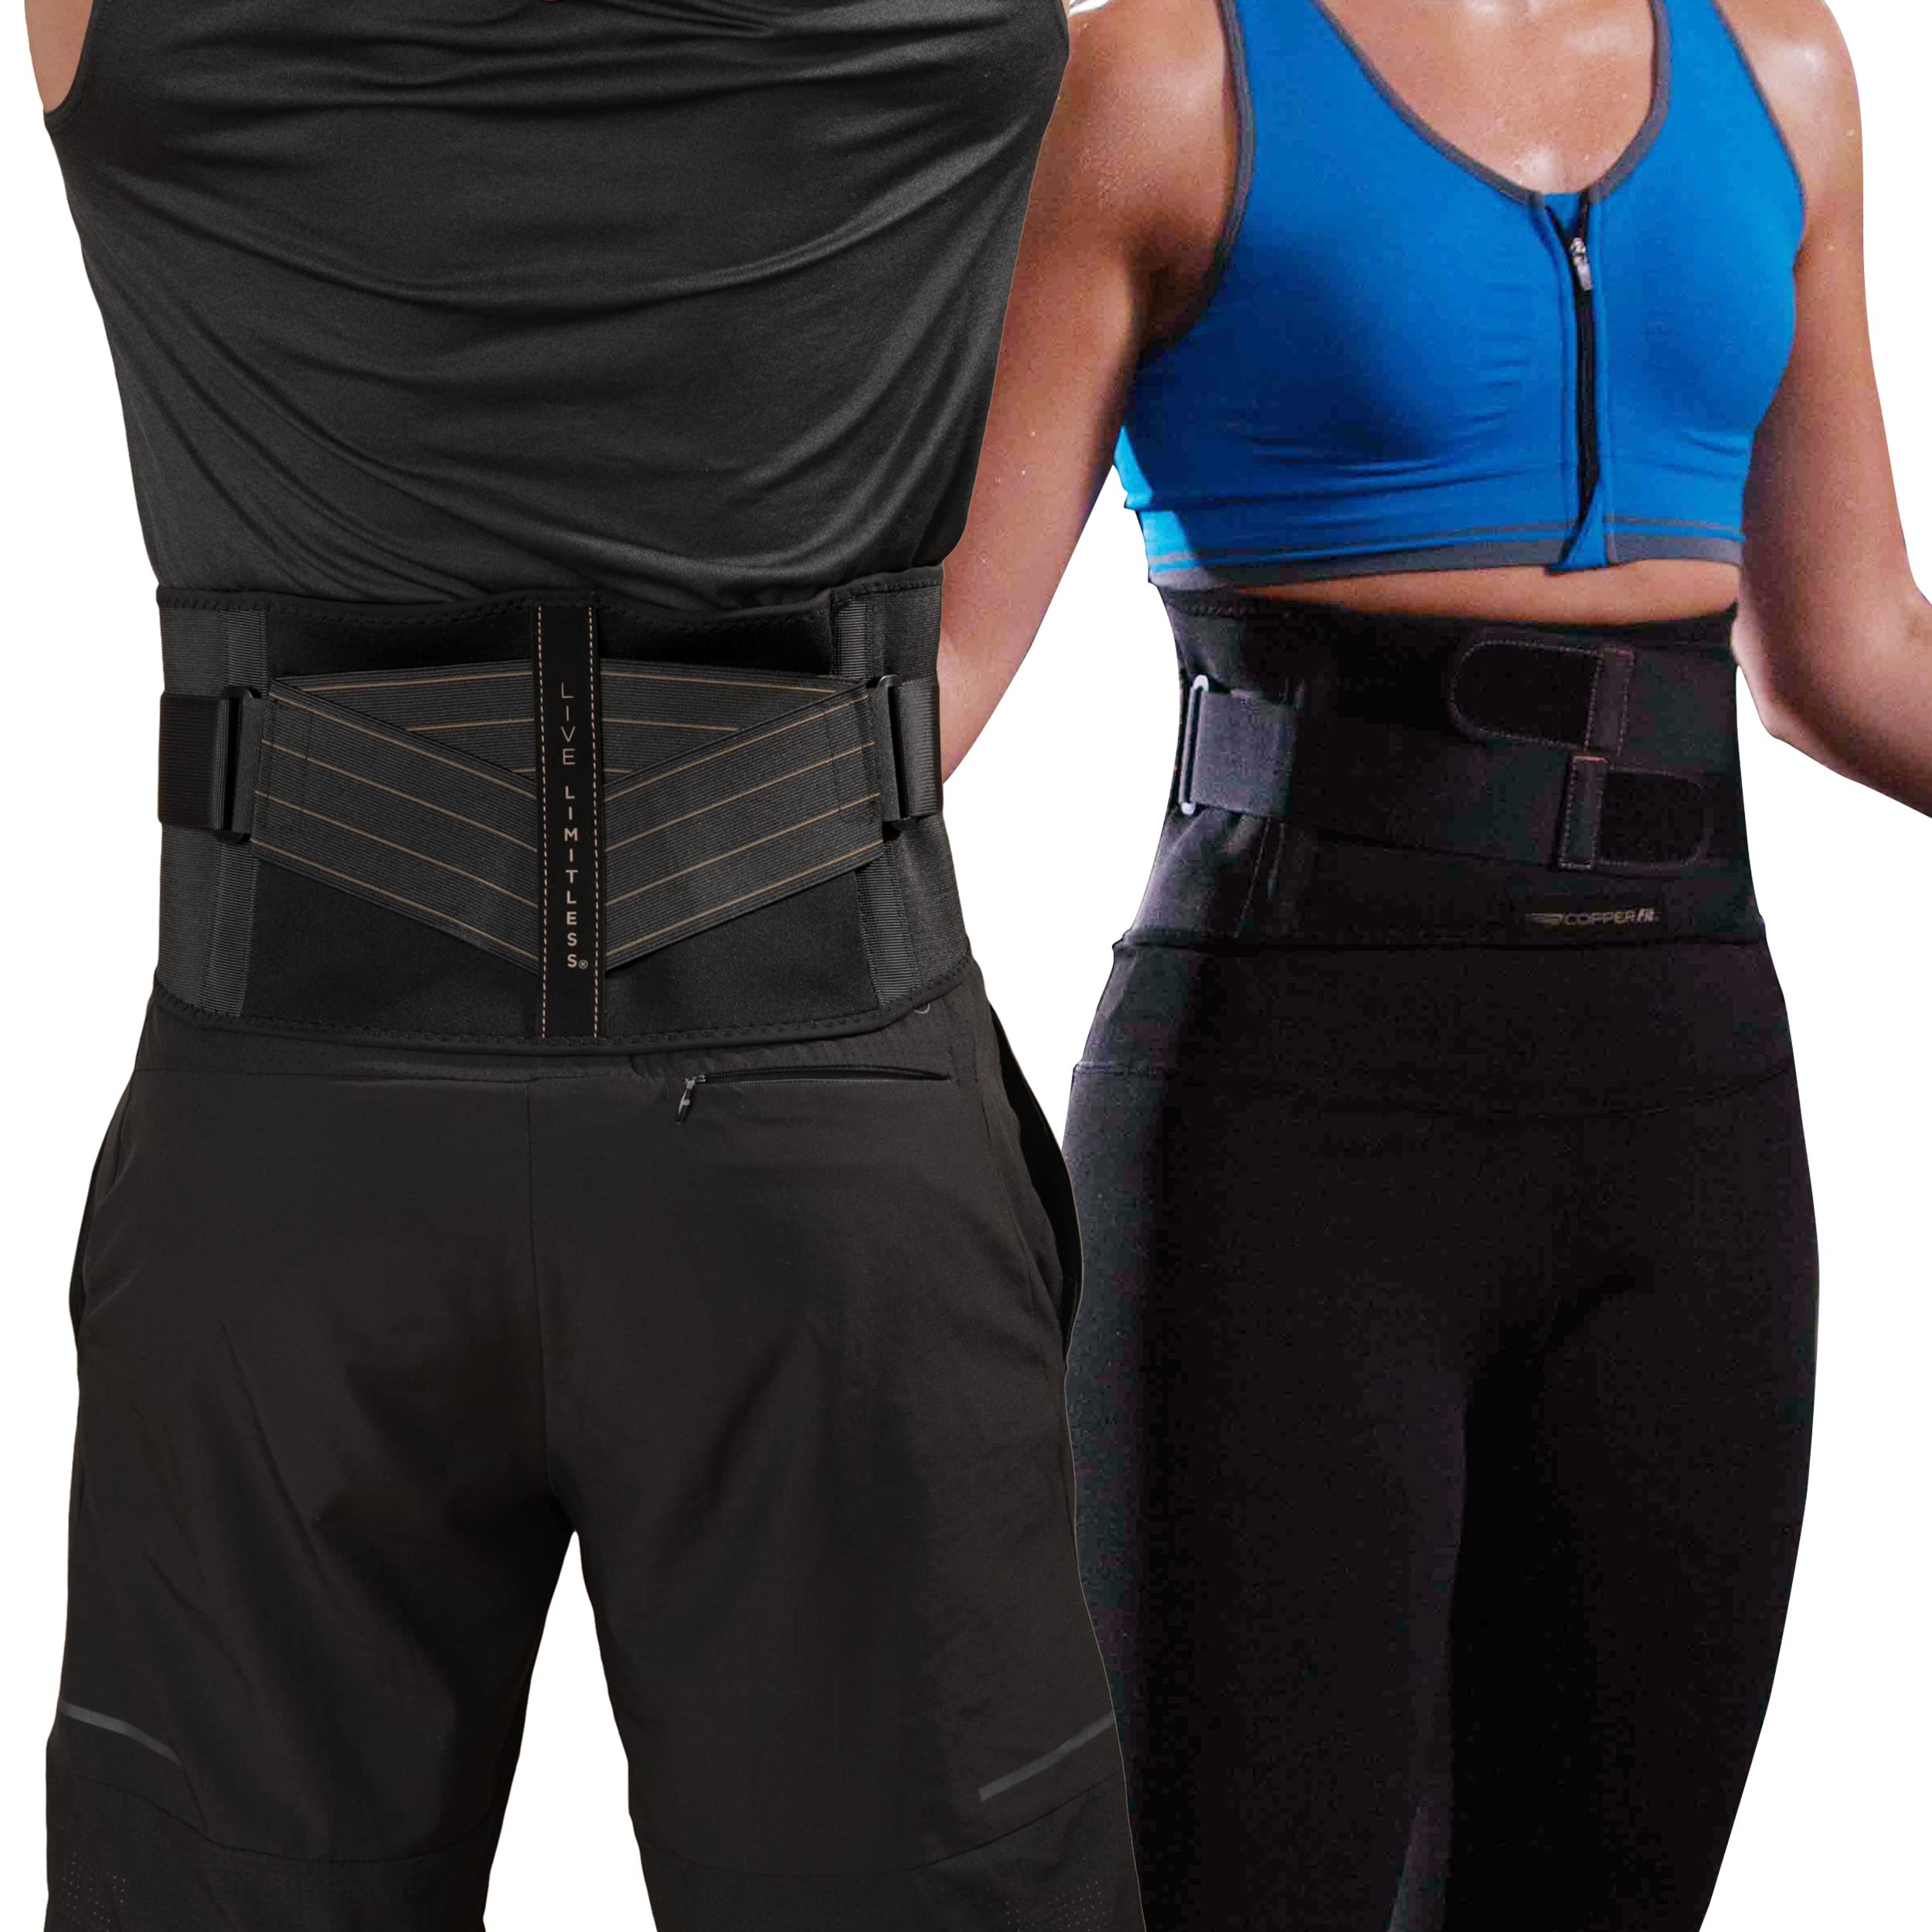 Copper Fit Unisex Rapid Relief Back Support Brace, India